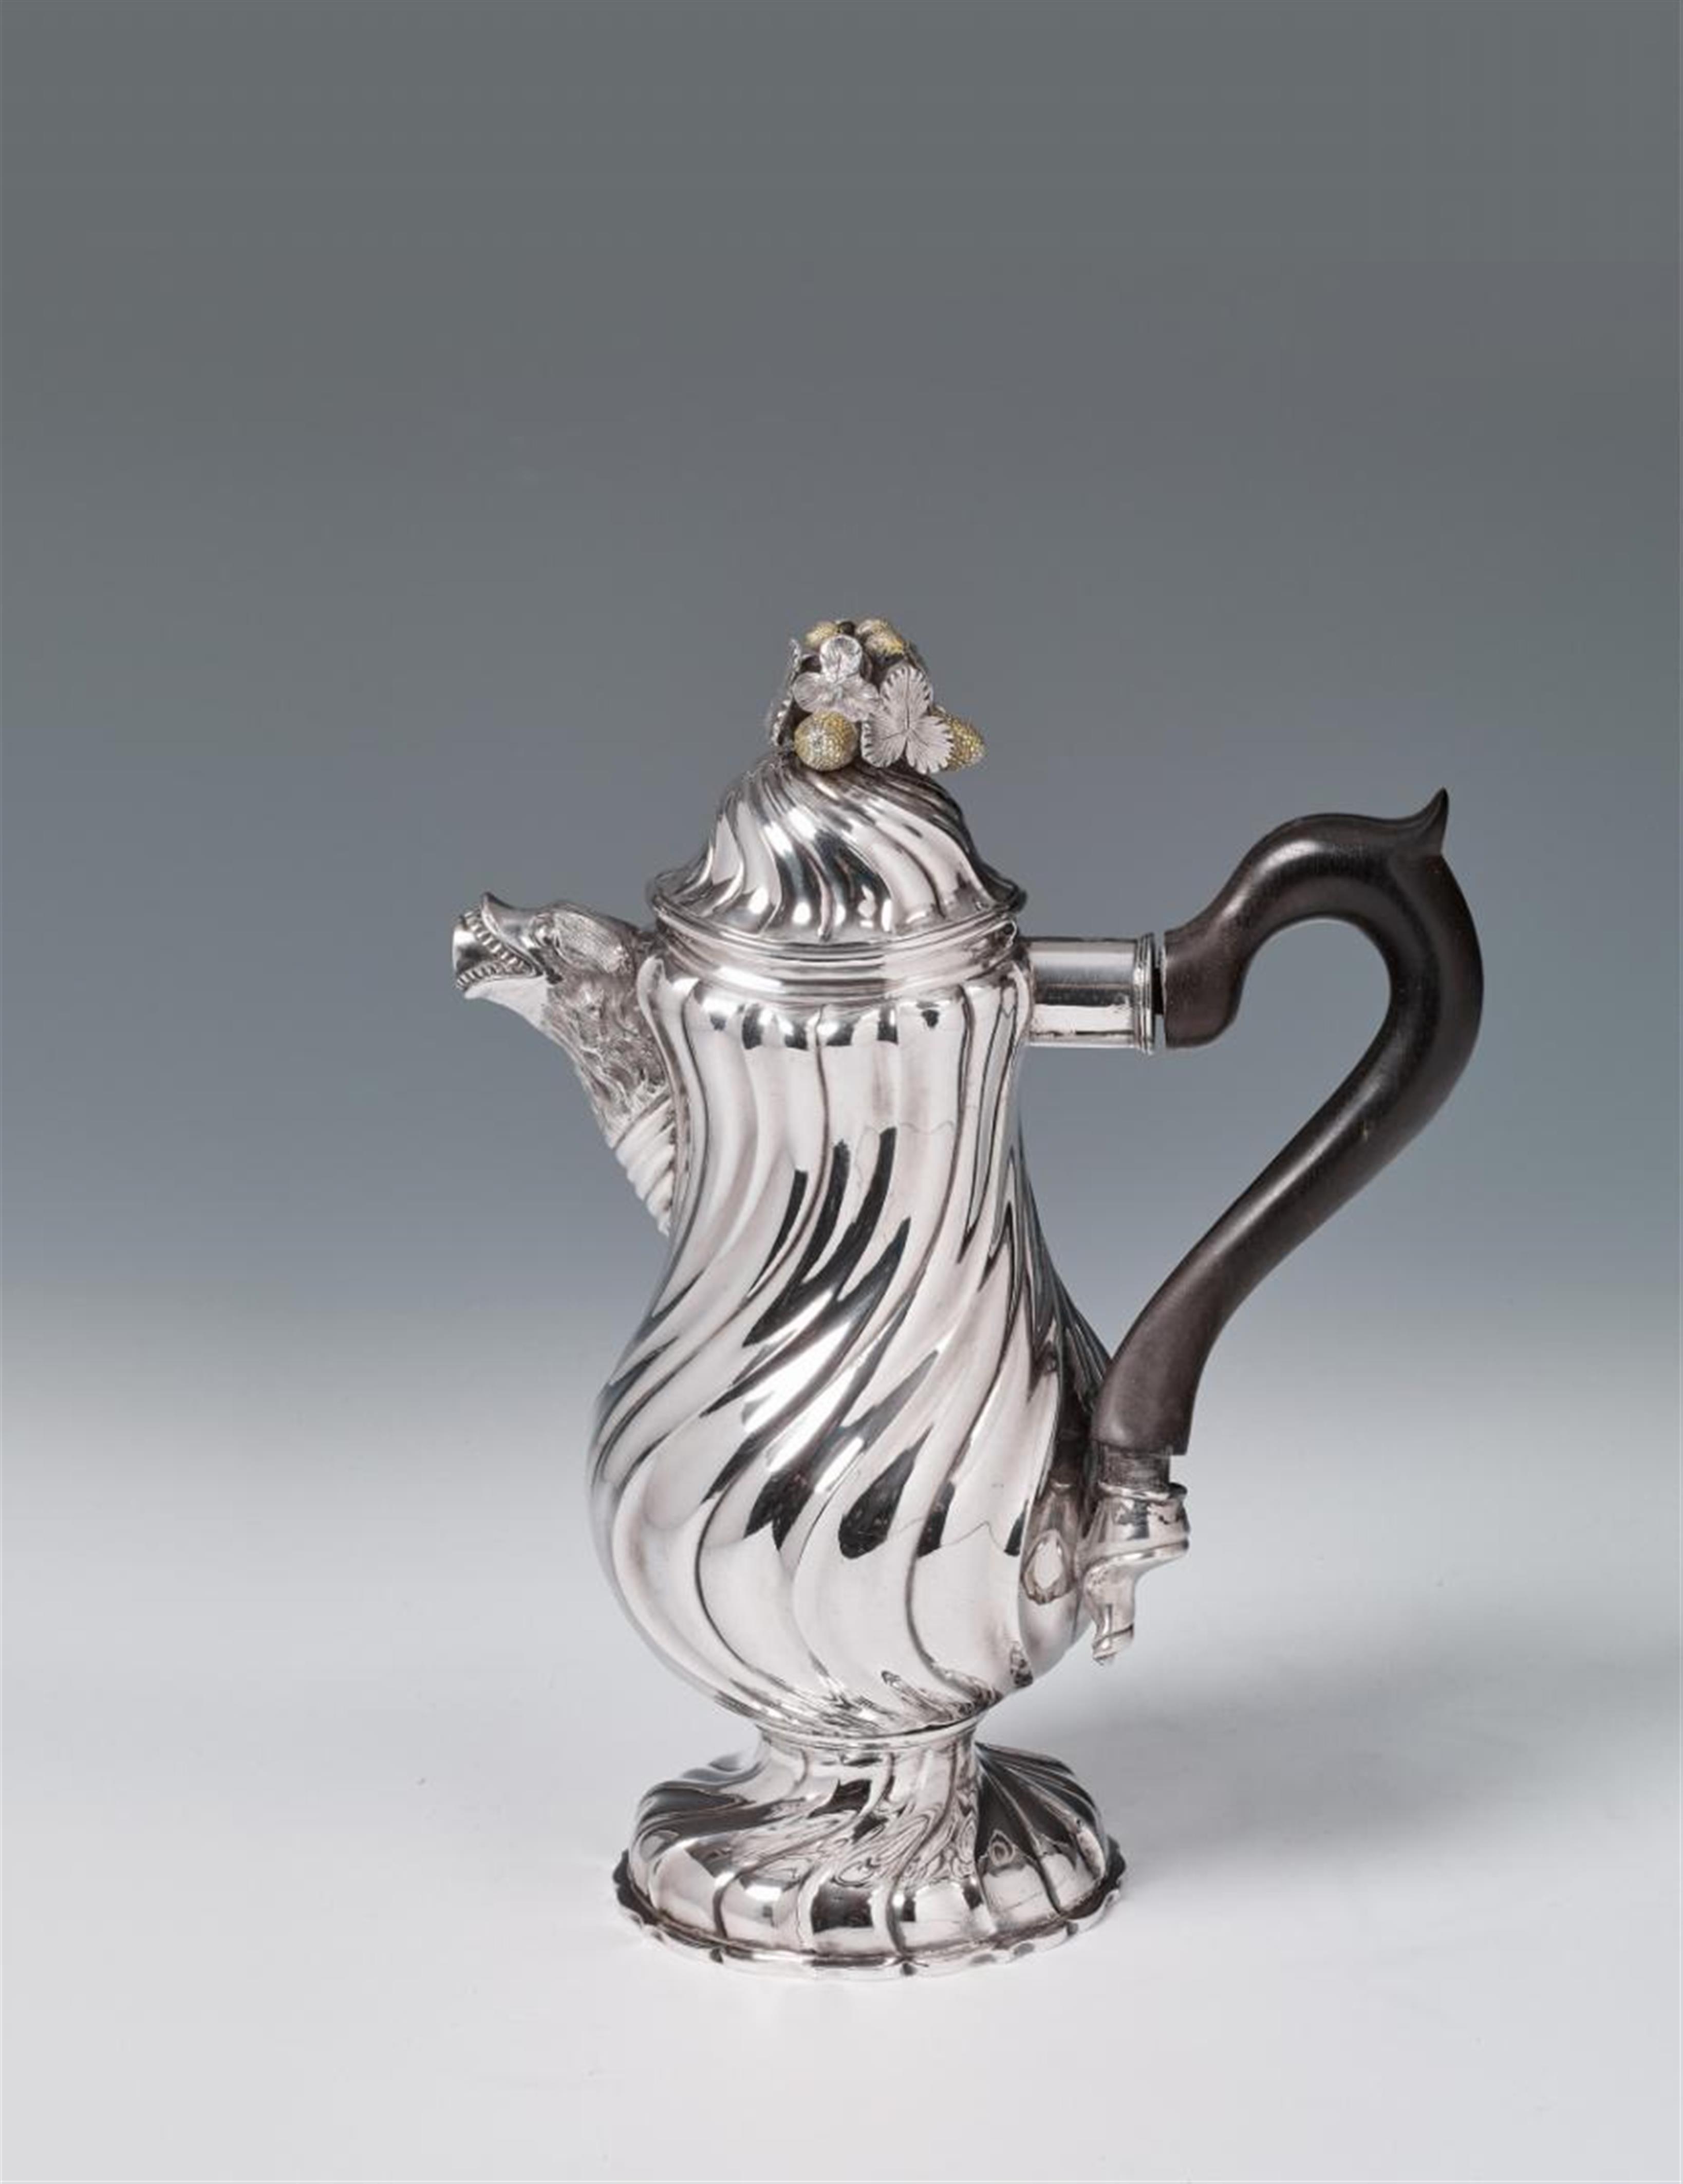 A rare Liège silver partially gilt coffee pot with an ebonised wood handle. Marks of Georges-Louis-Sébastien Henrotay, 1771. - image-1